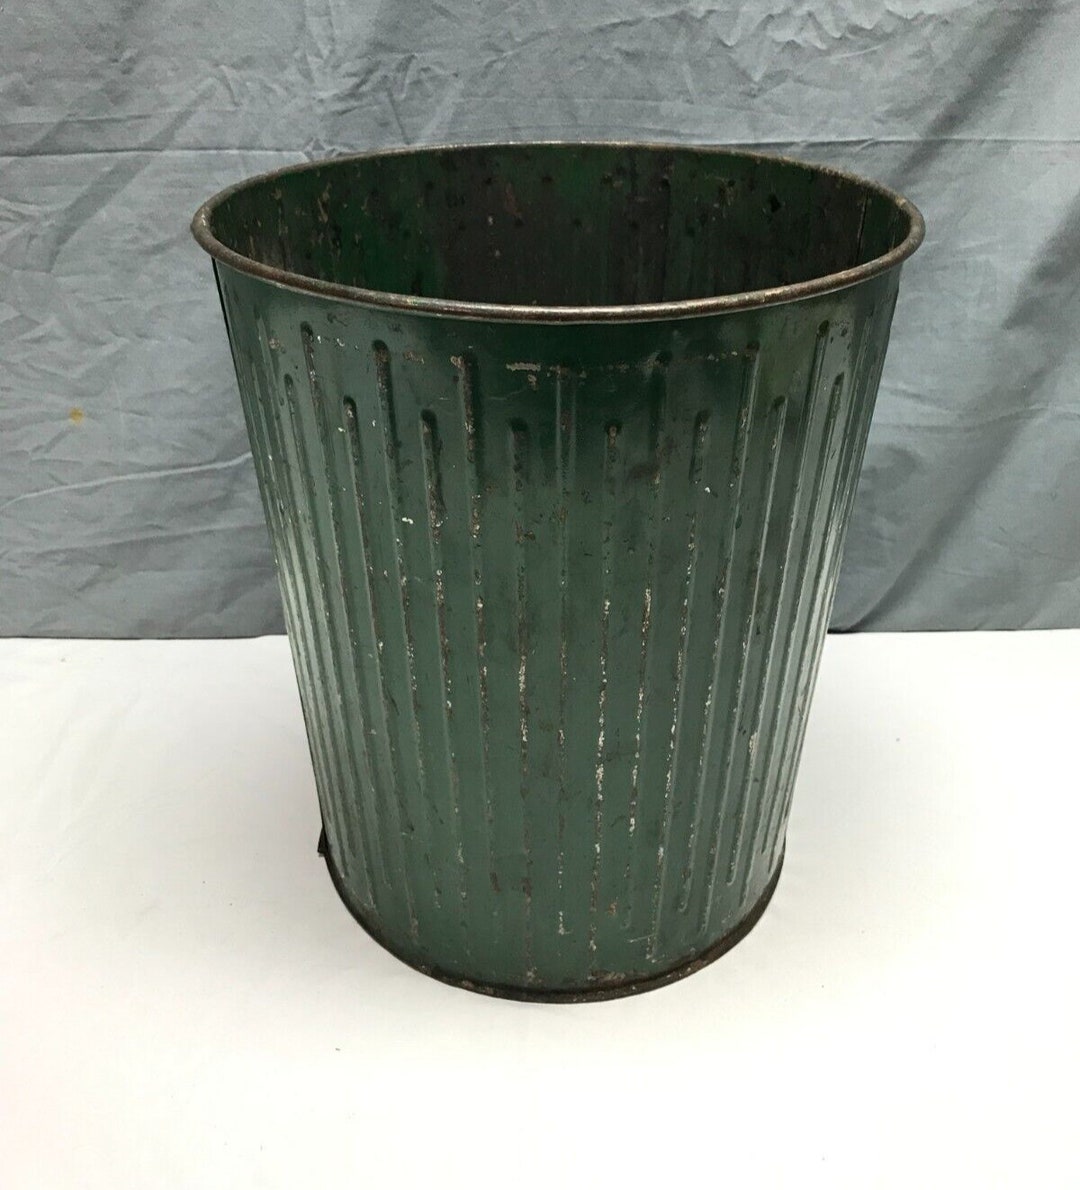 highly sought after original american depression era expanded steel nemco  green painted office trash or paper can with securely attached bottom